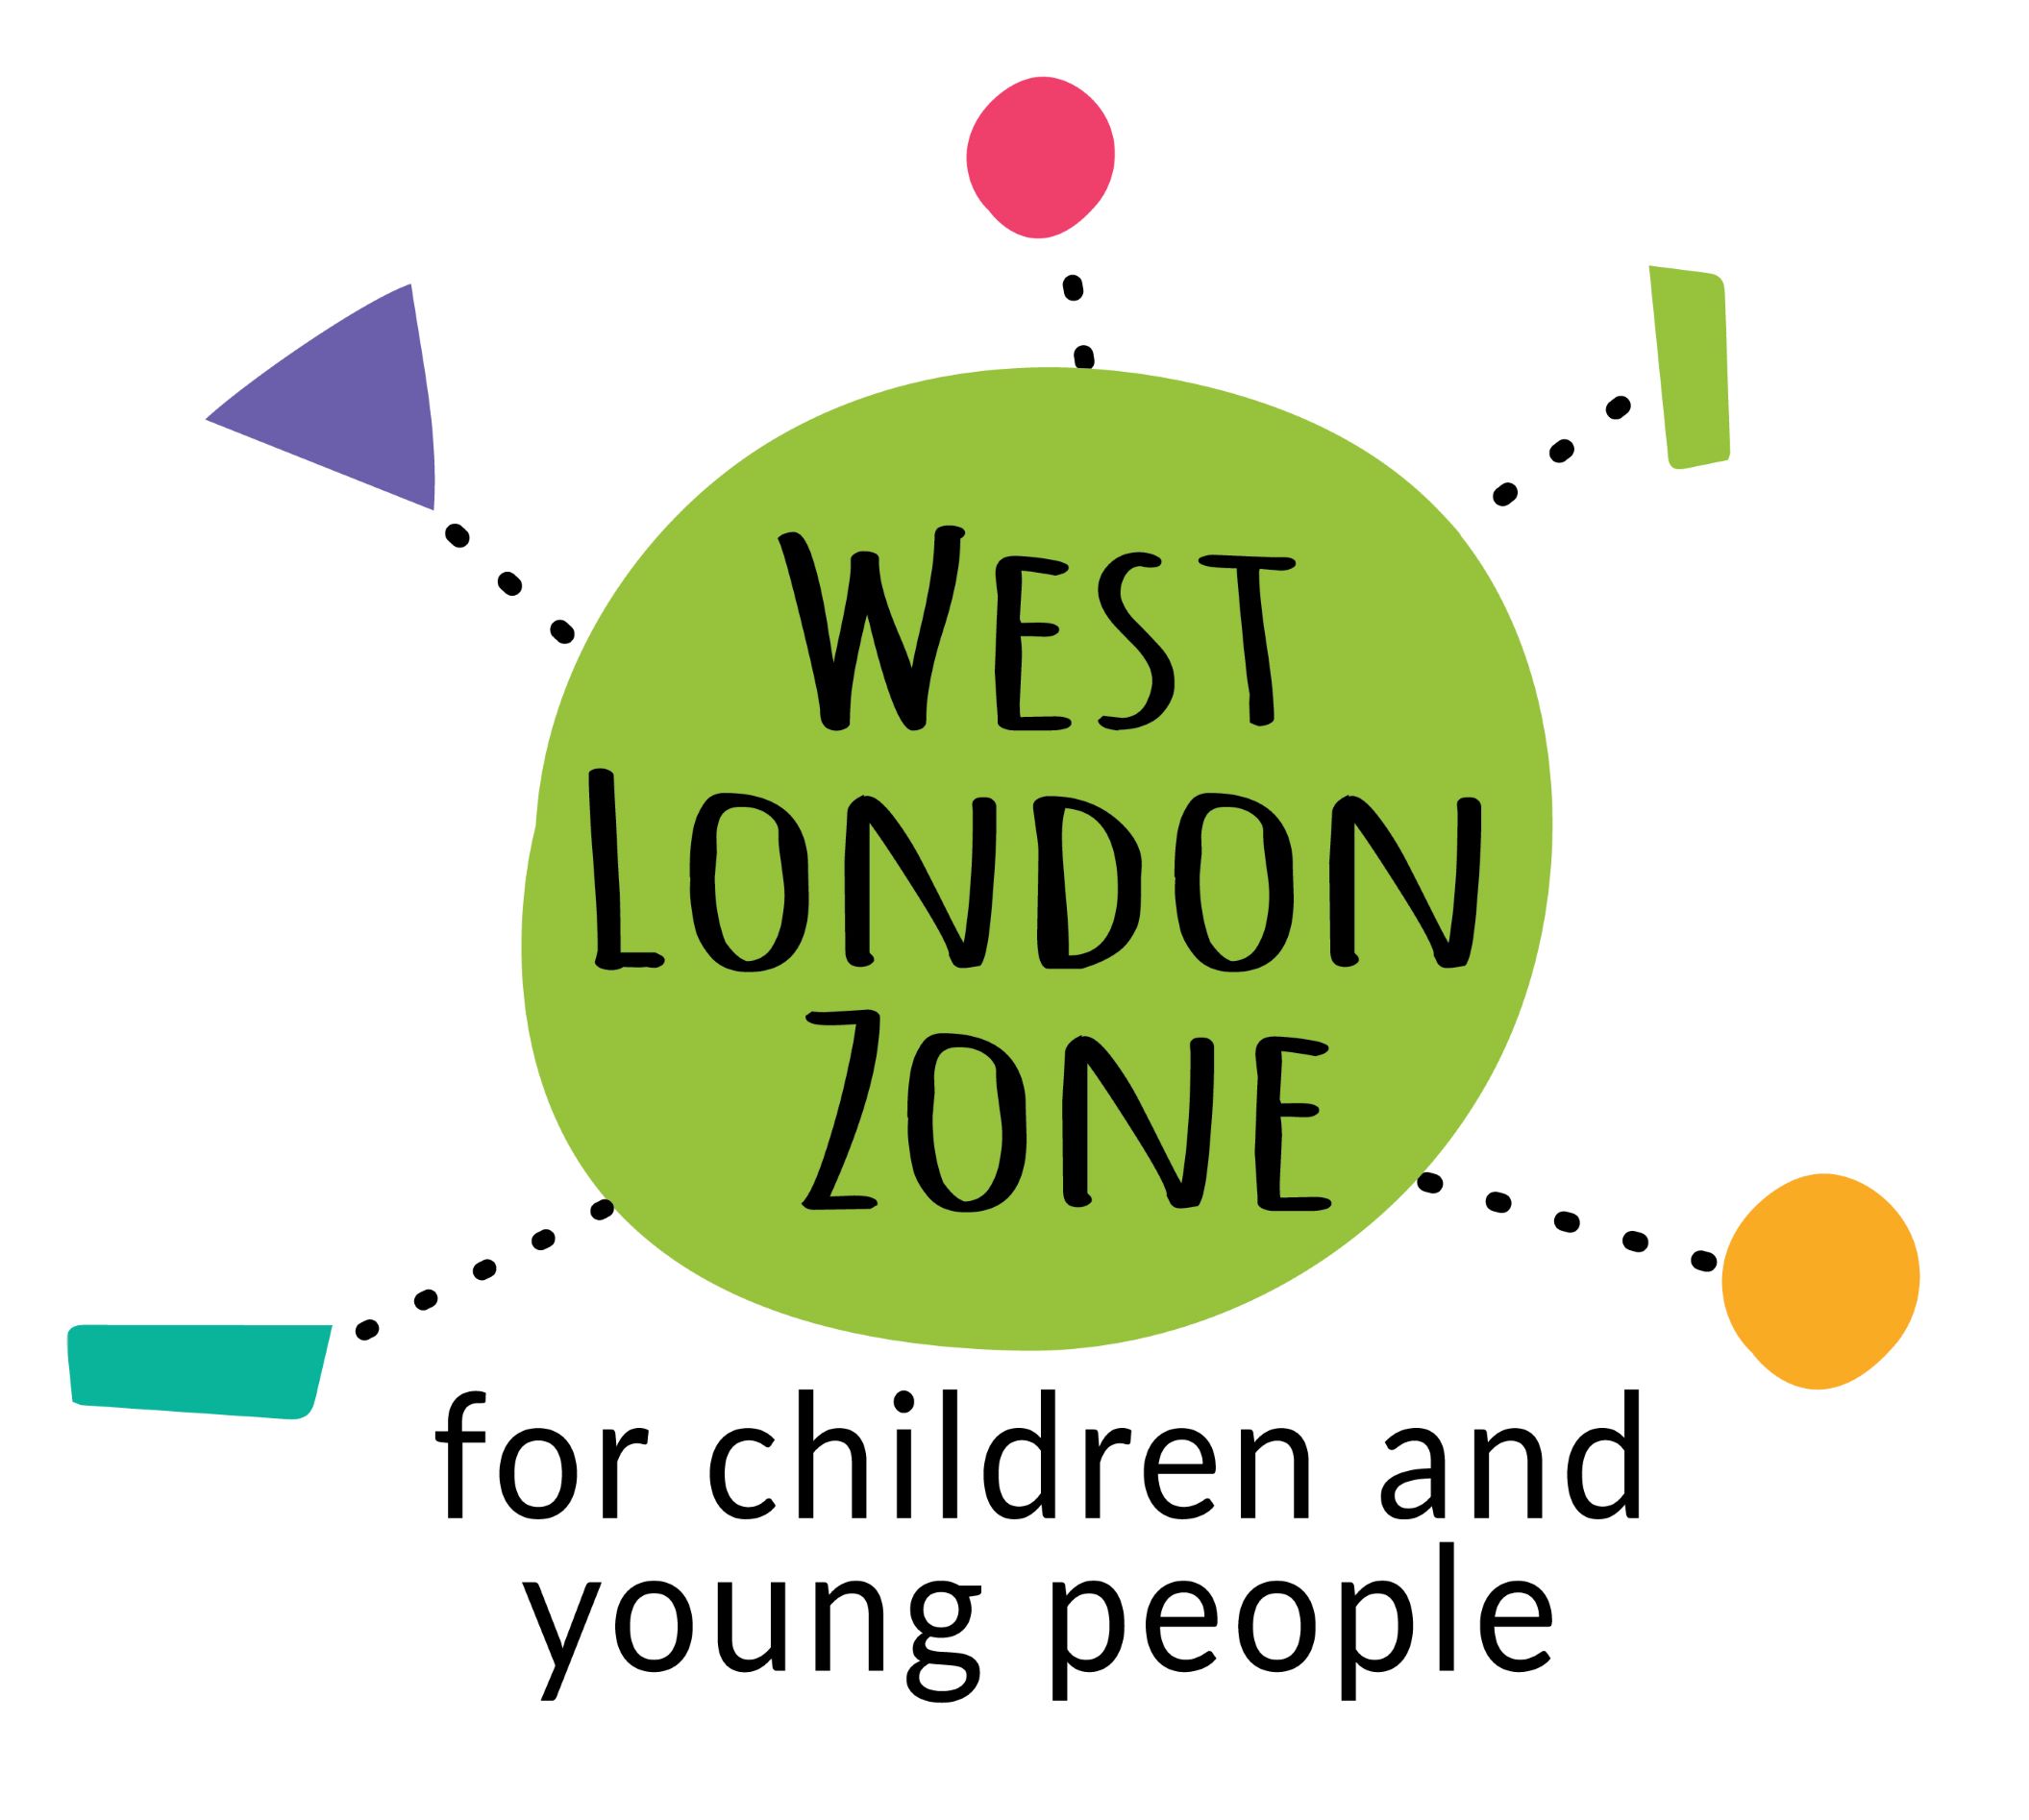 Make a donation to West London Zone